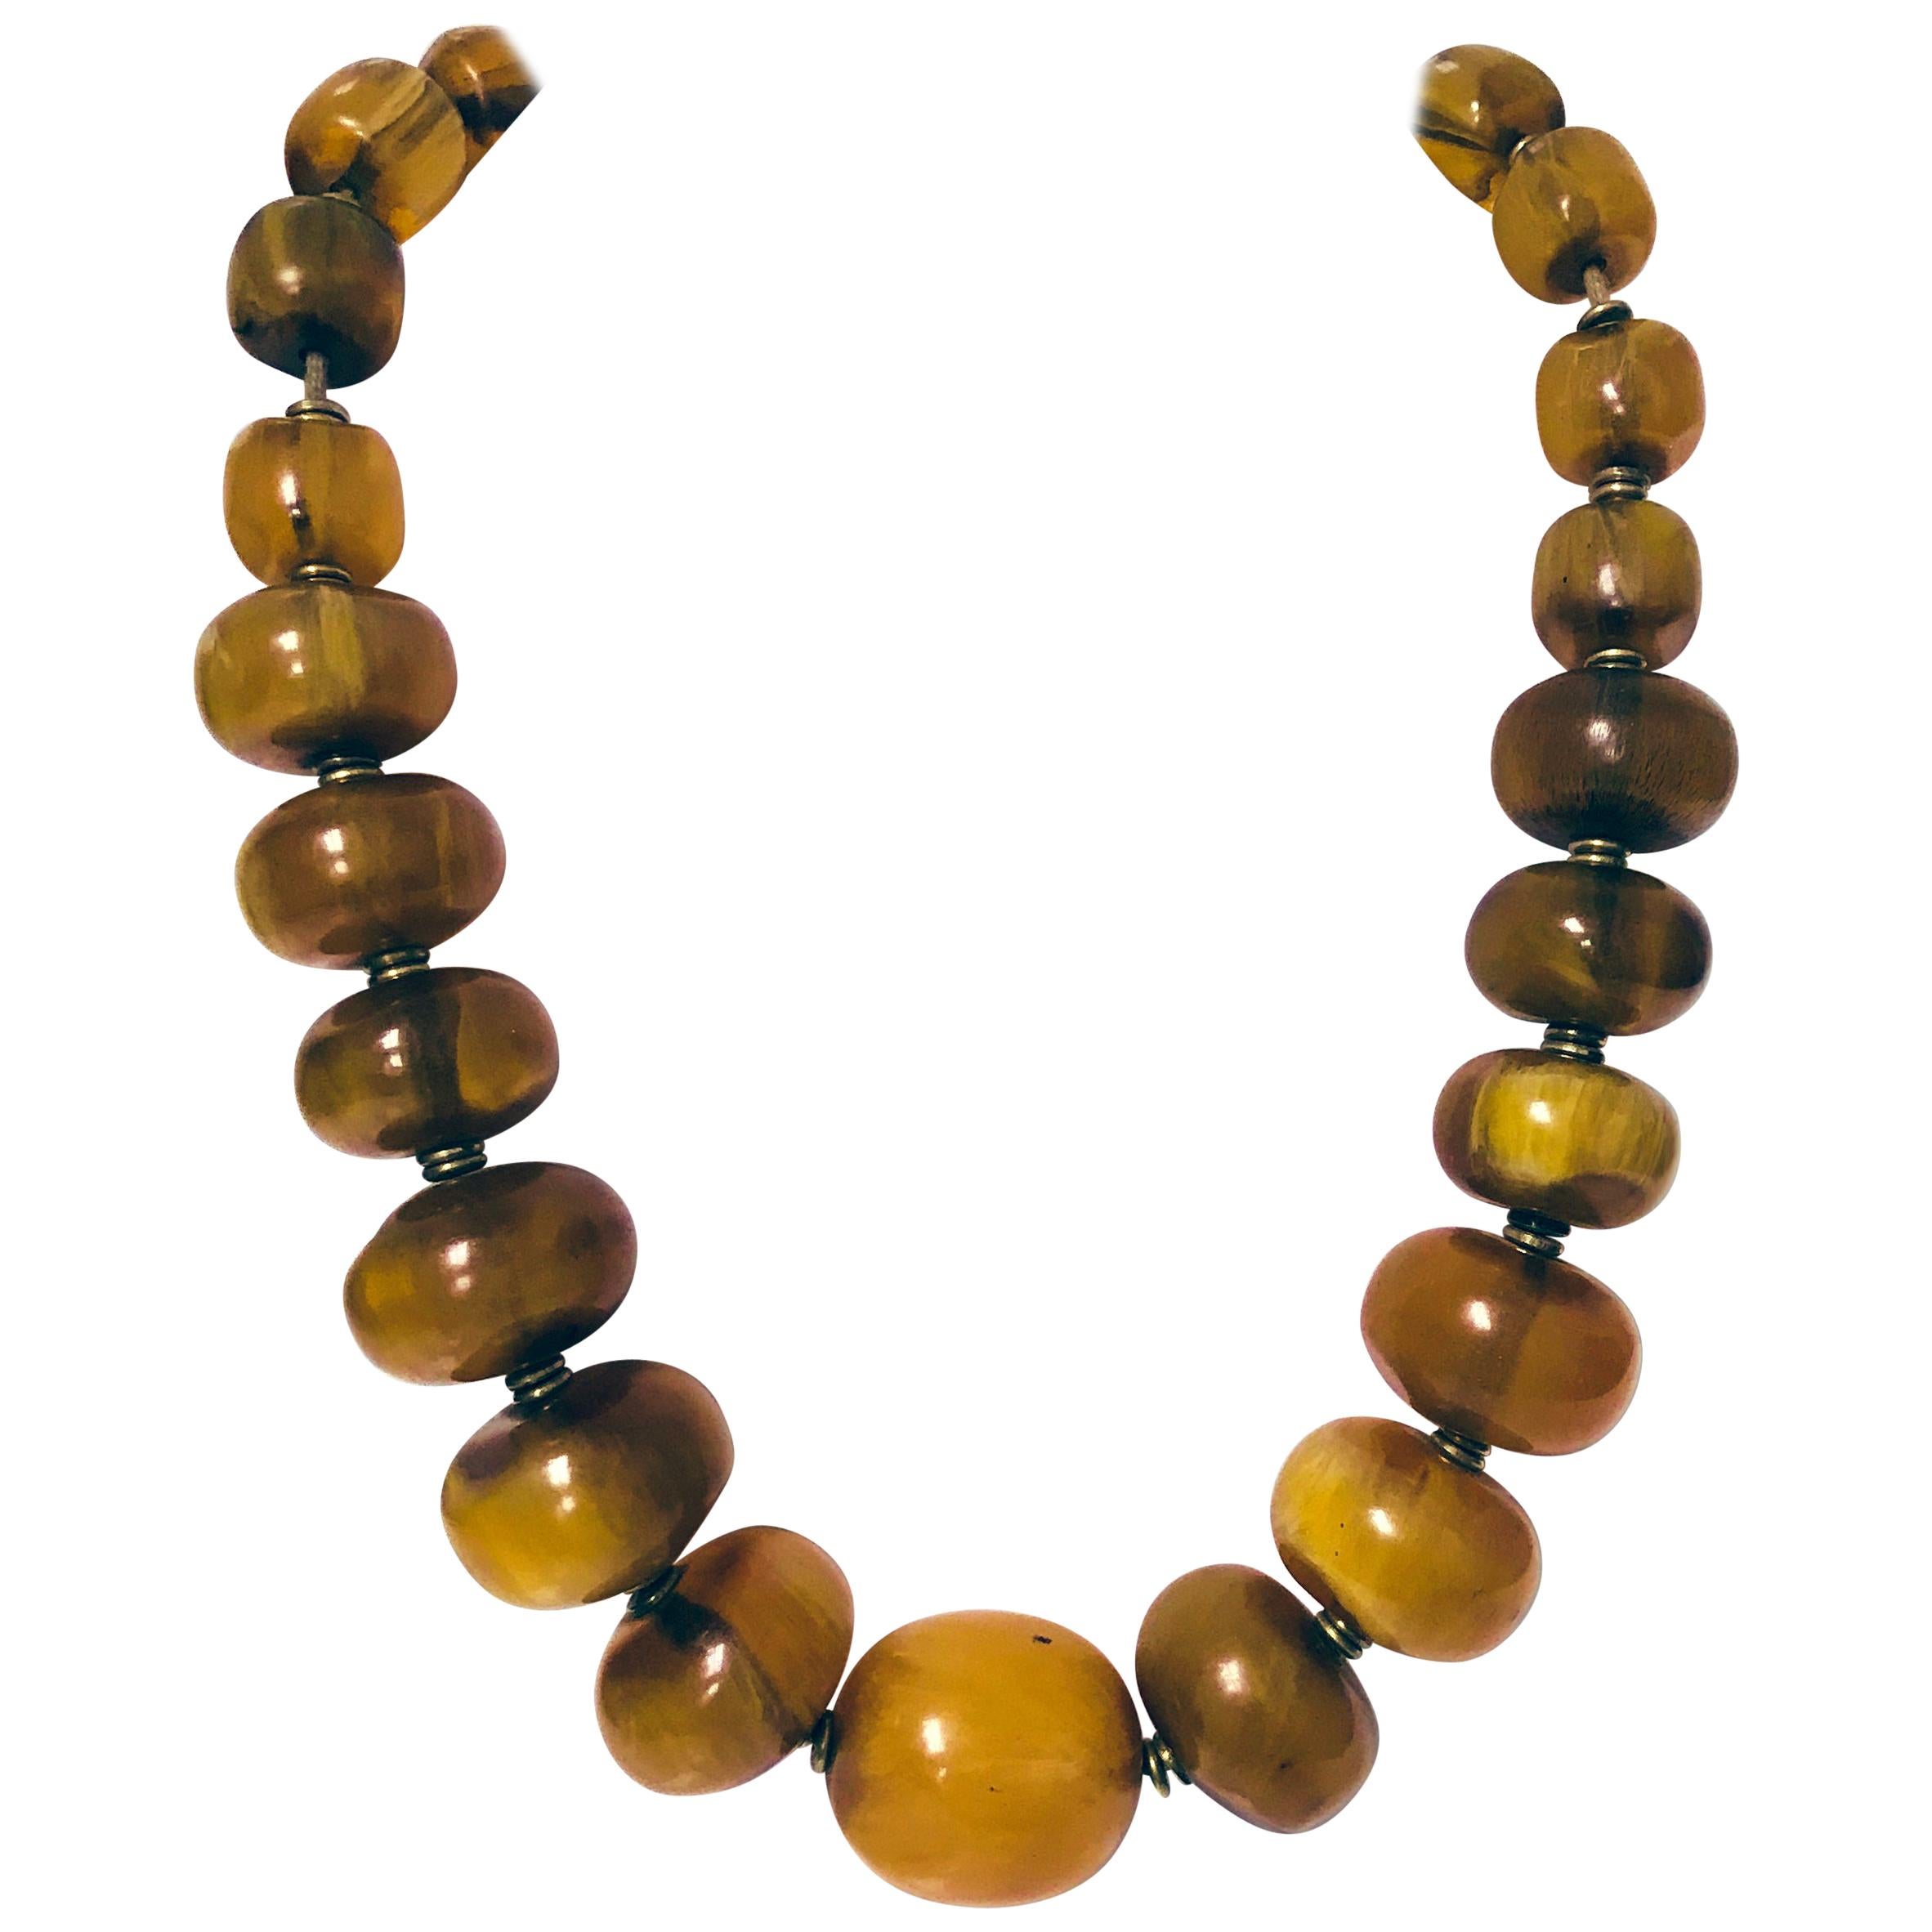 Large Vintage Amber Bead Necklace